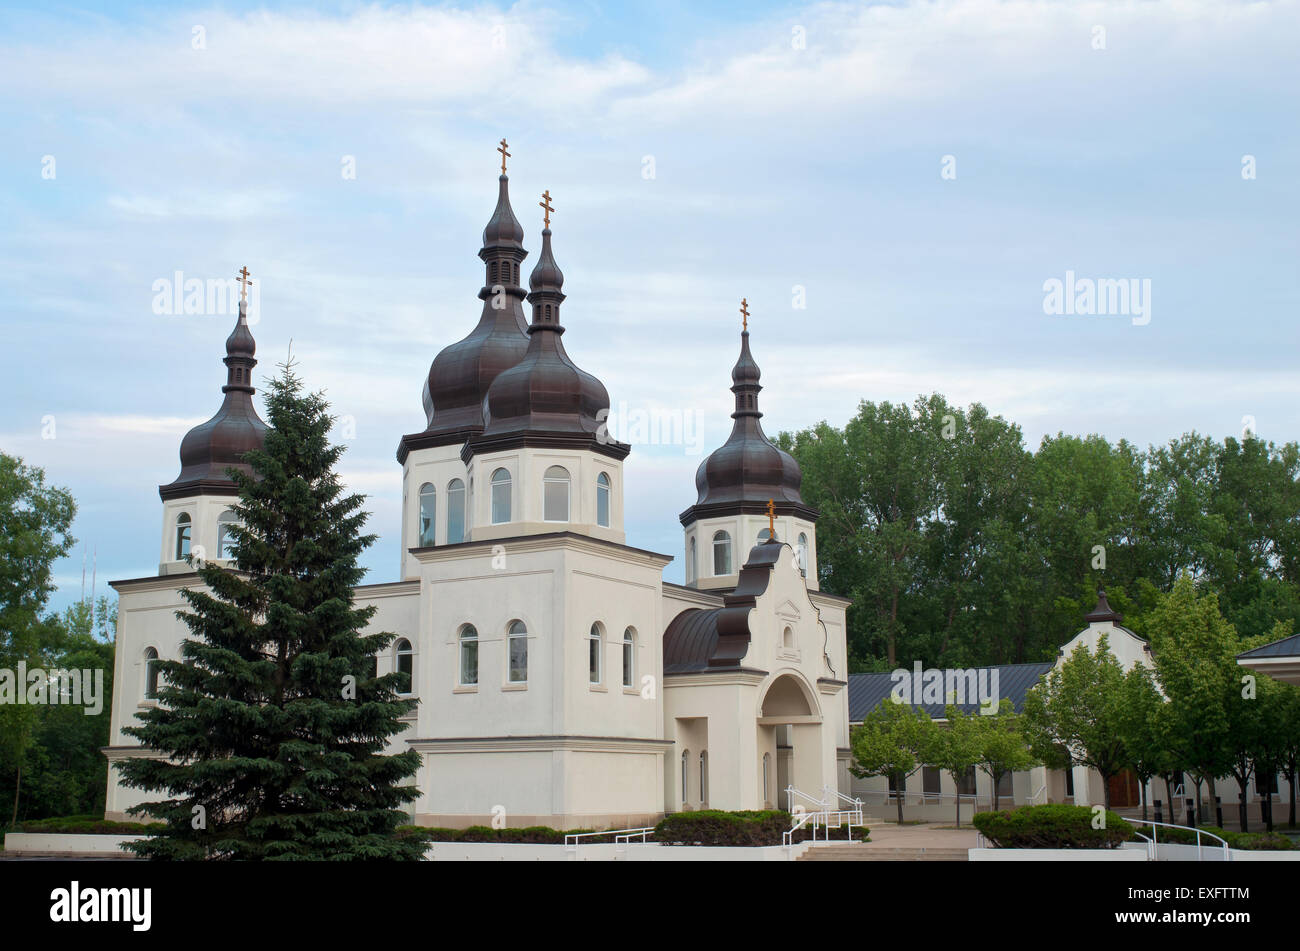 ukrainian church architecture of baroque style and copper clad domes with cupolas and crosses Stock Photo